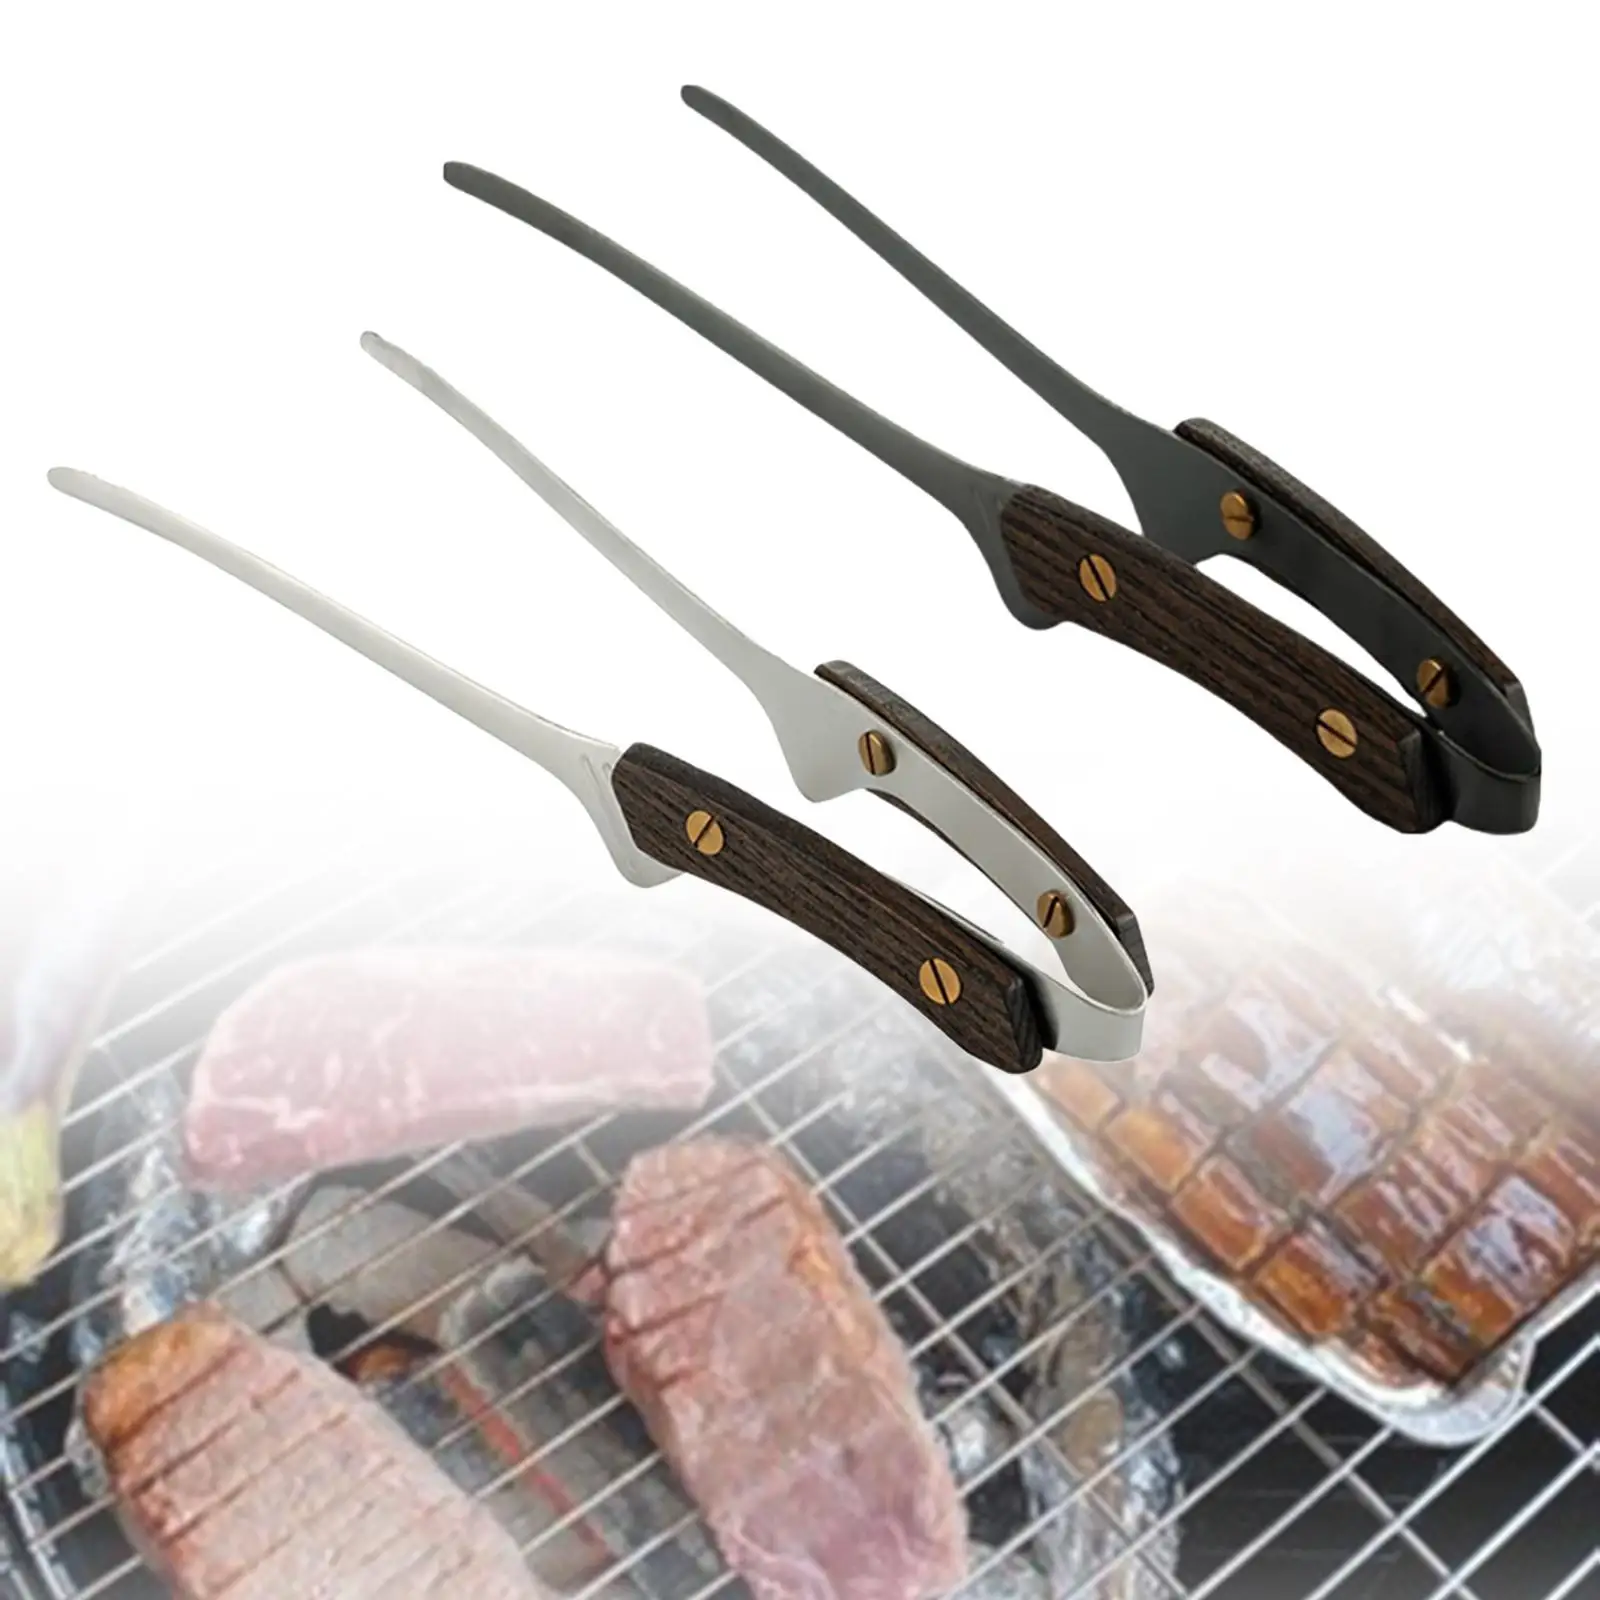 BBQ Tongs Tweezer Salads Vegetable Clamp Non Slip Heavy Duty Barbecue Tongs